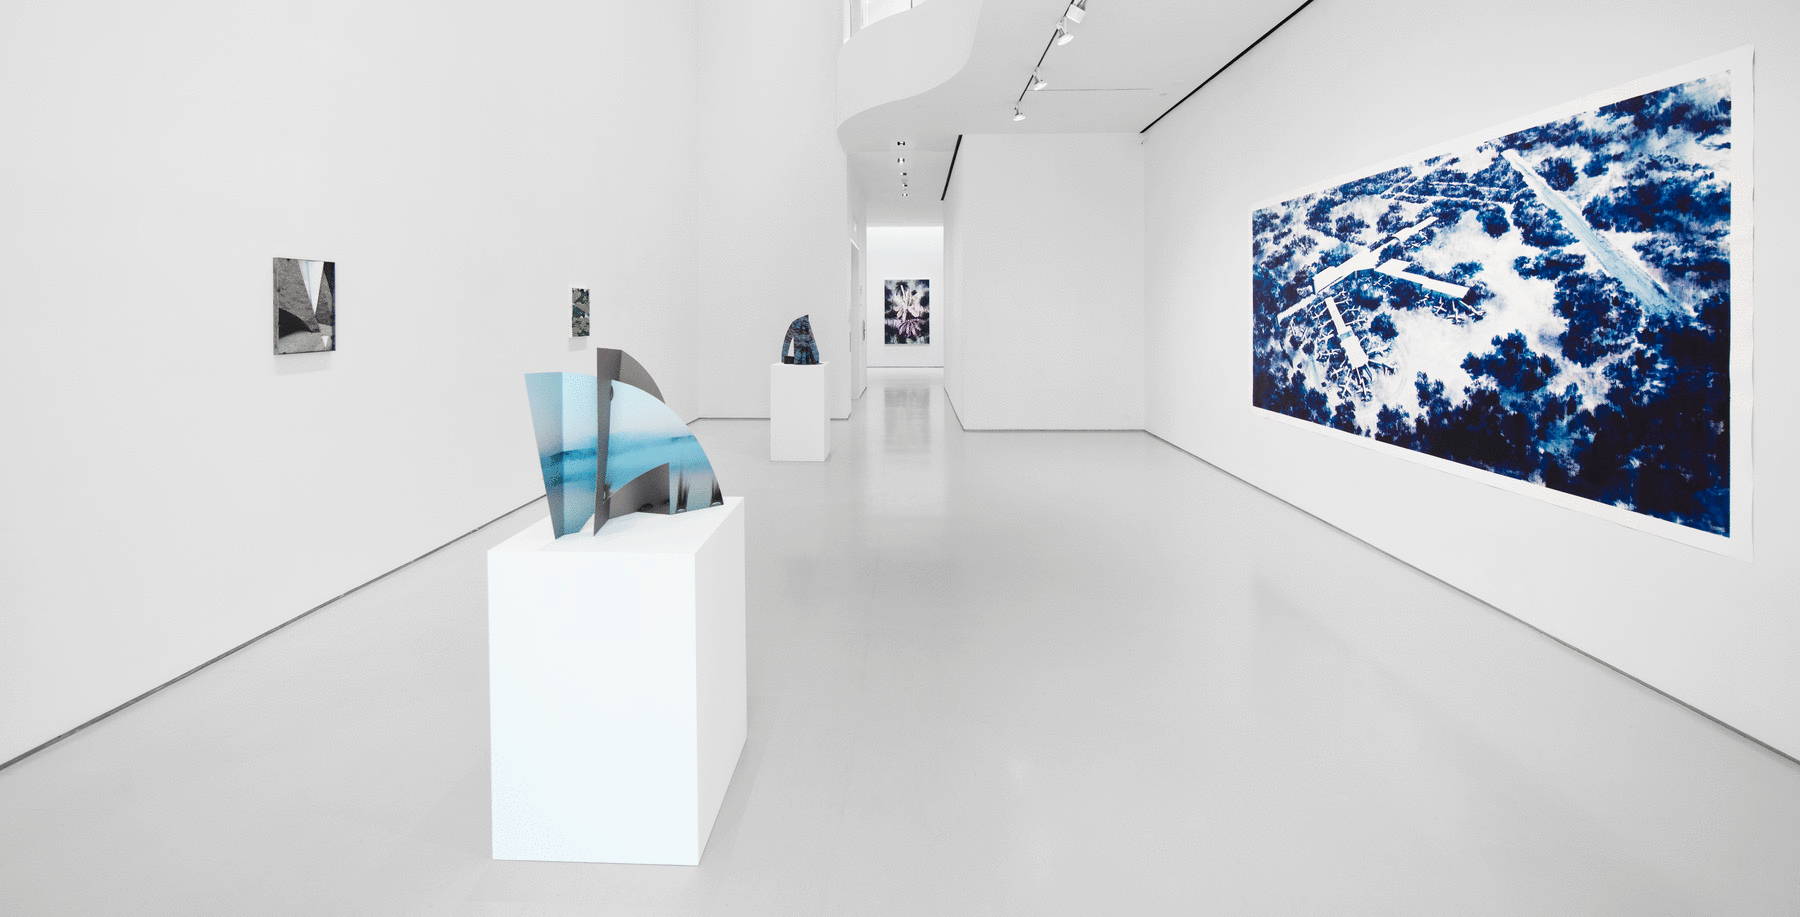 Installation view of a white gallery room with two sculptures on pedestals and four pieces hanging on the walls